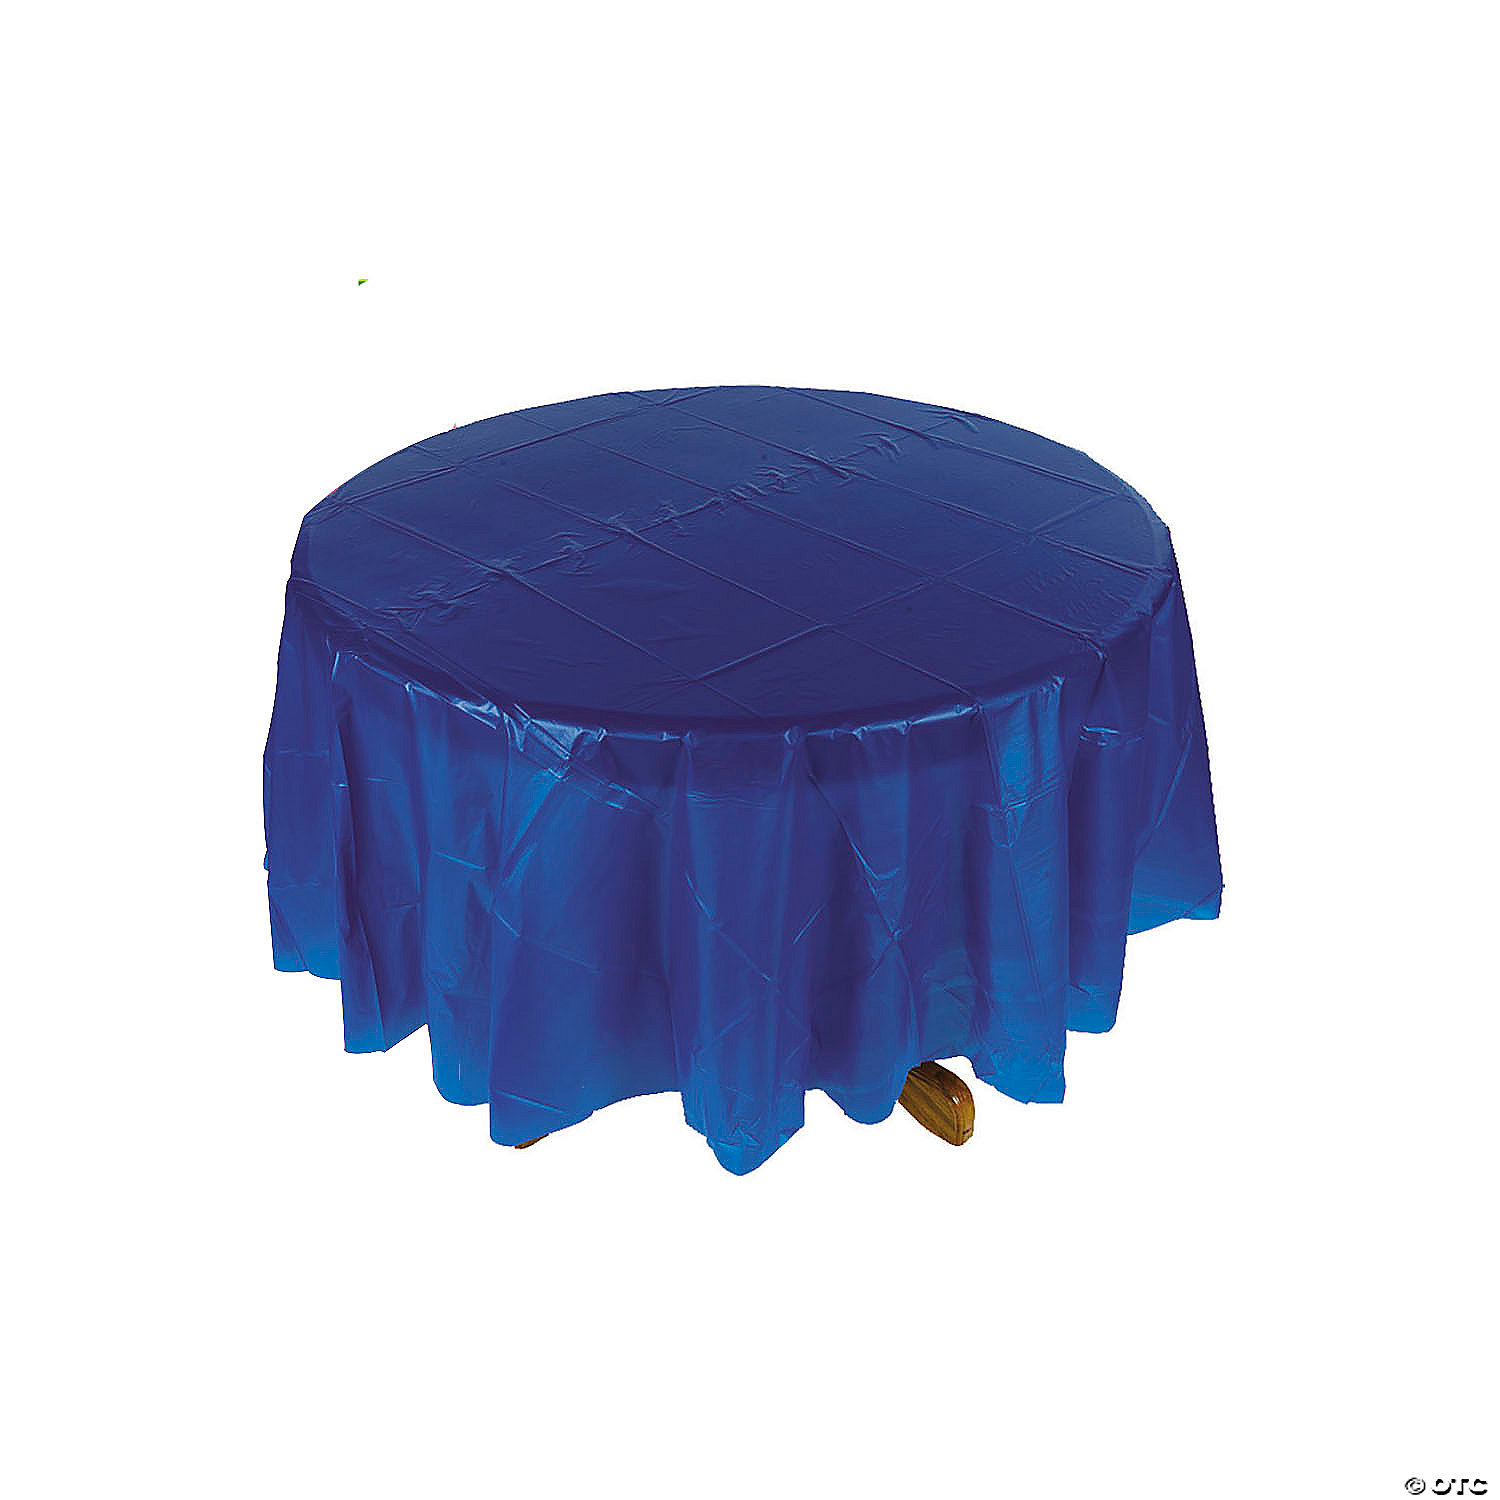 Round Plastic Tablecloth Oriental Trading, Vinyl Tablecloths Round